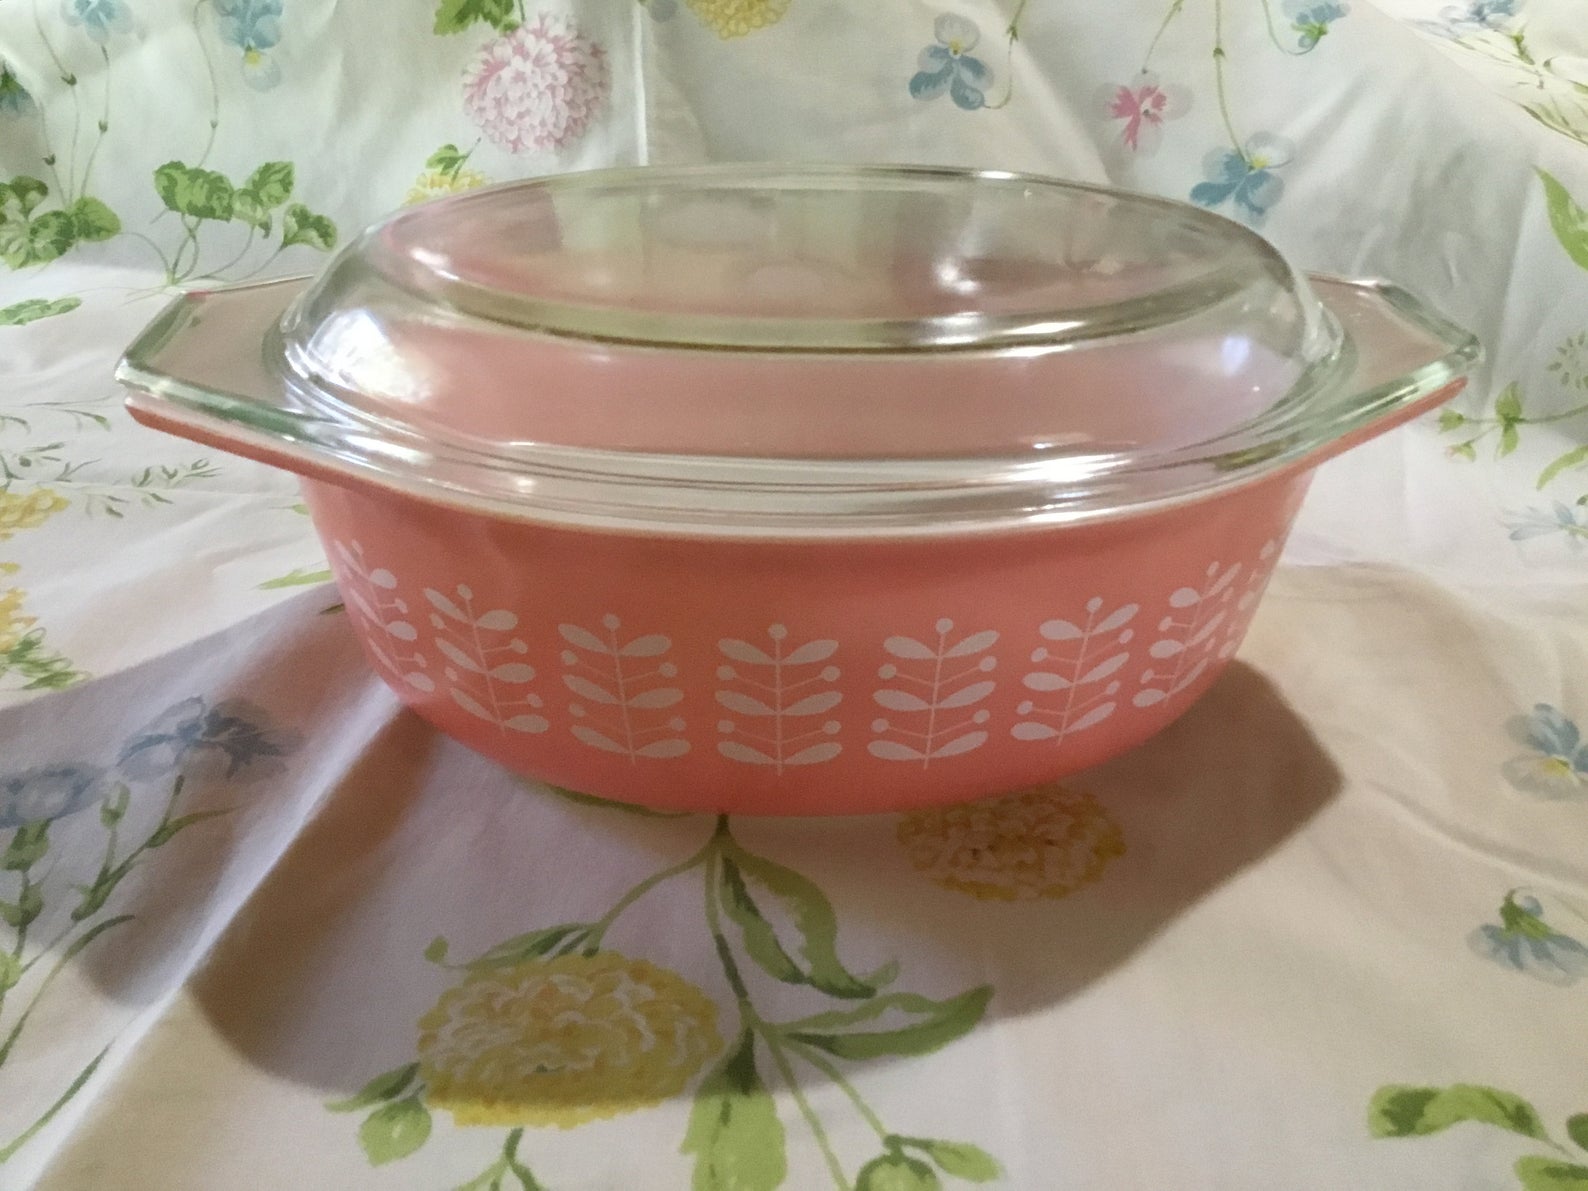 Clear with white design. Vintage pyrex casserole bowl with lid